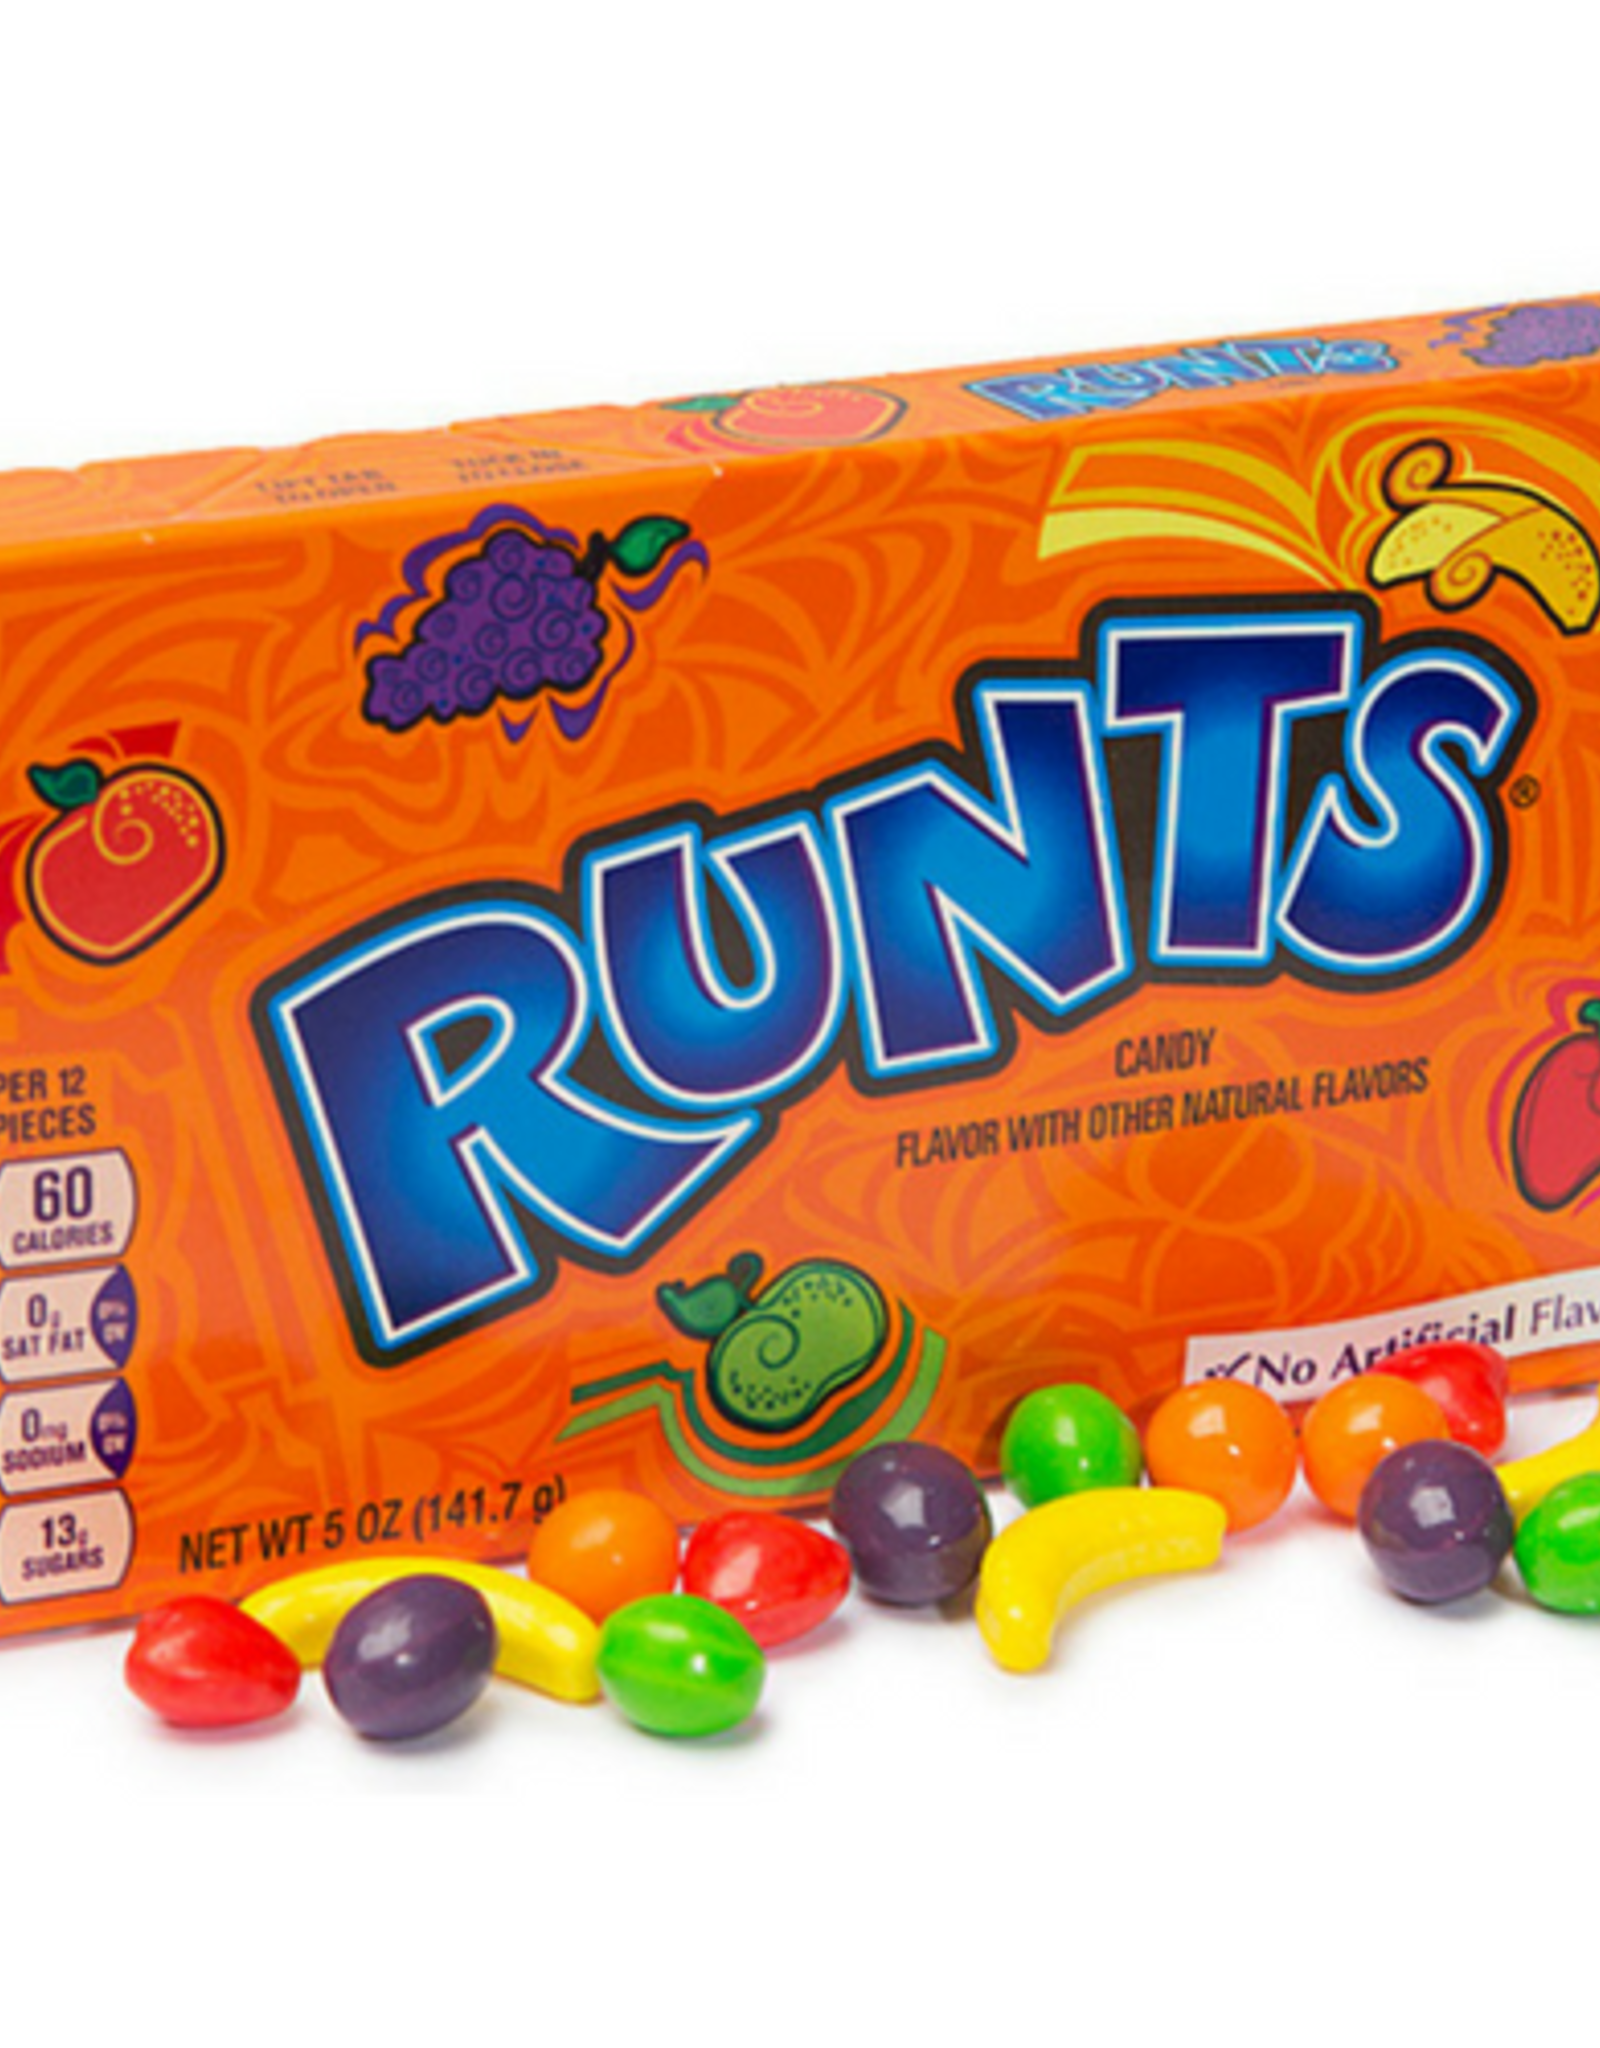 Pacific Candy Runts Theatre Size